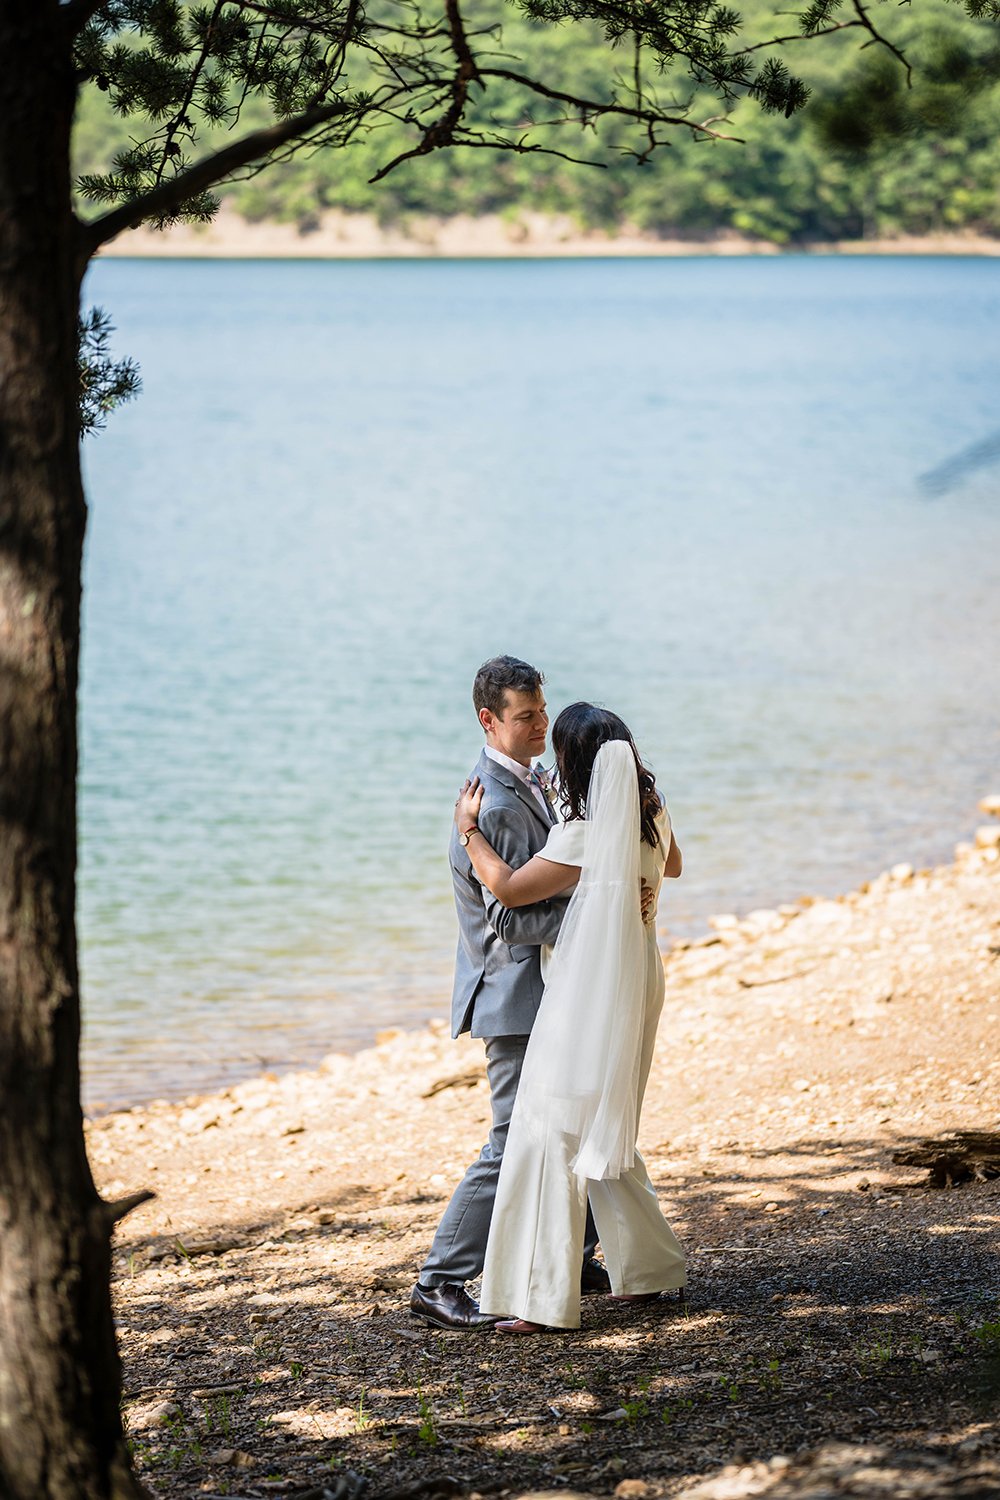 A wedding couple dances along the shores of Carvin's Cove on their elopement day.